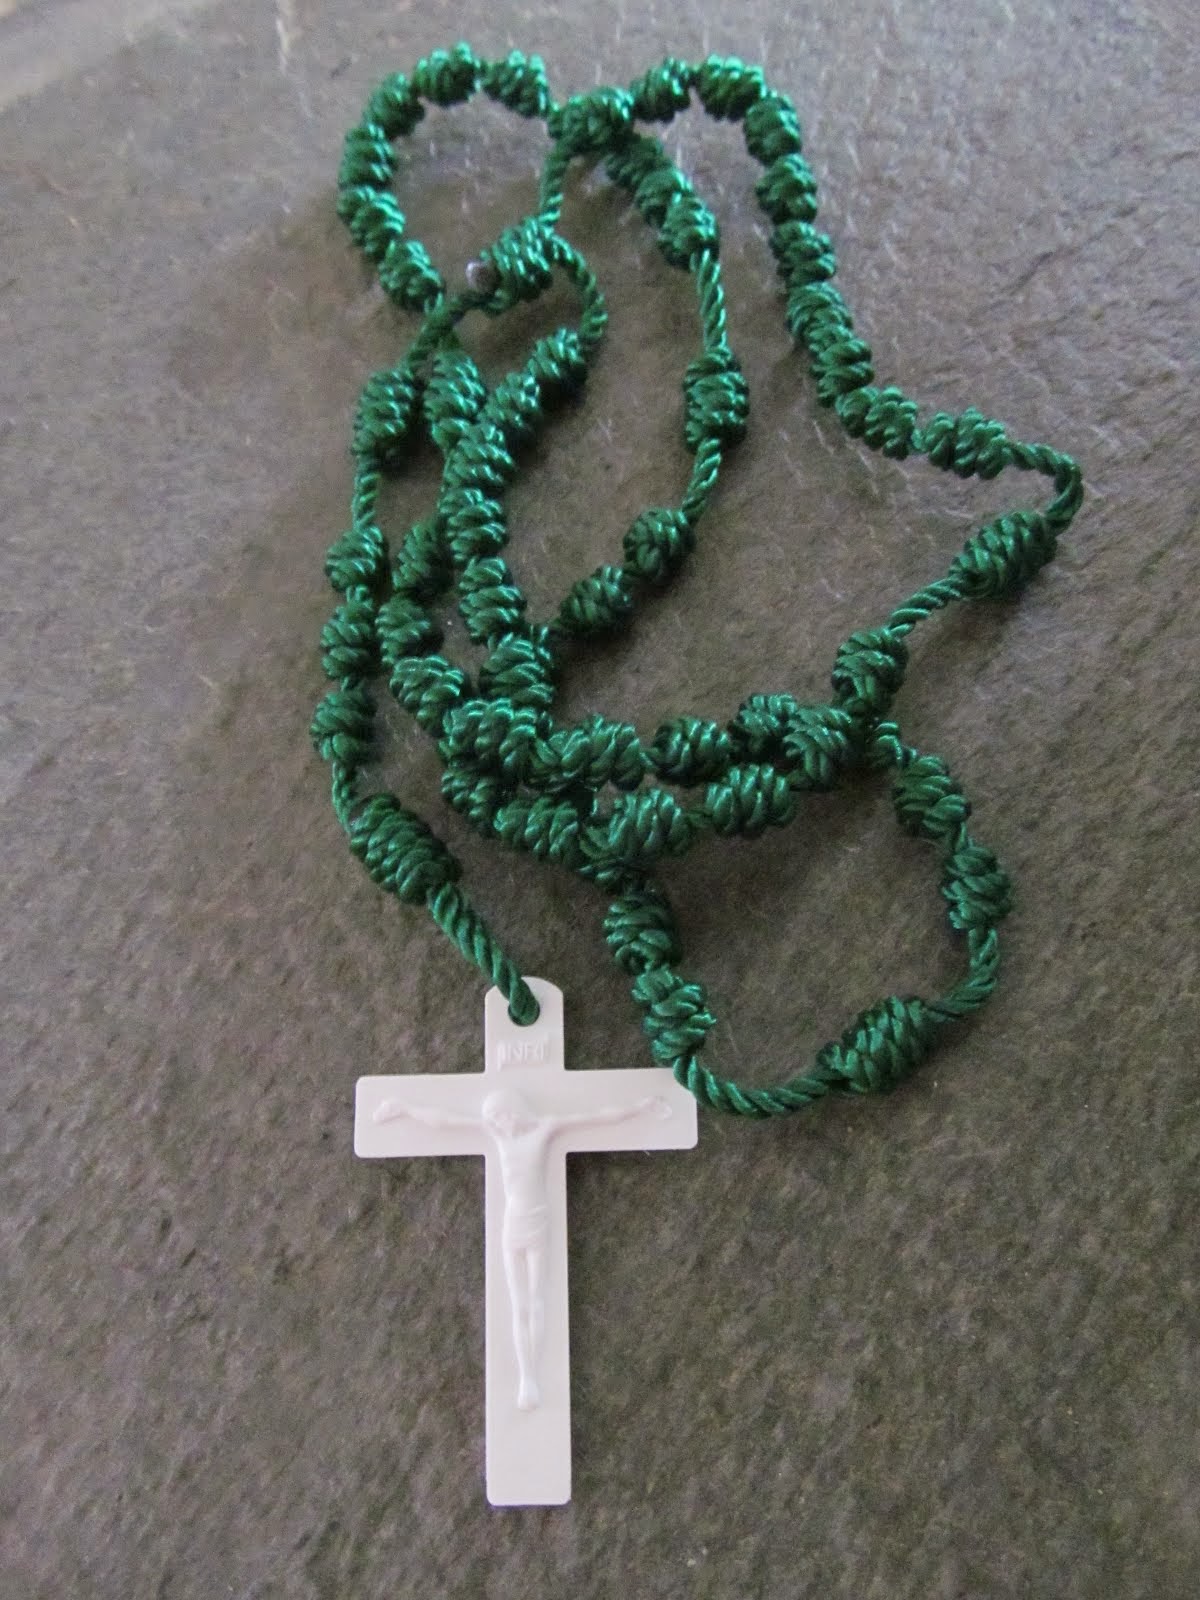 We also send all-knotted twine rosaries for missions: